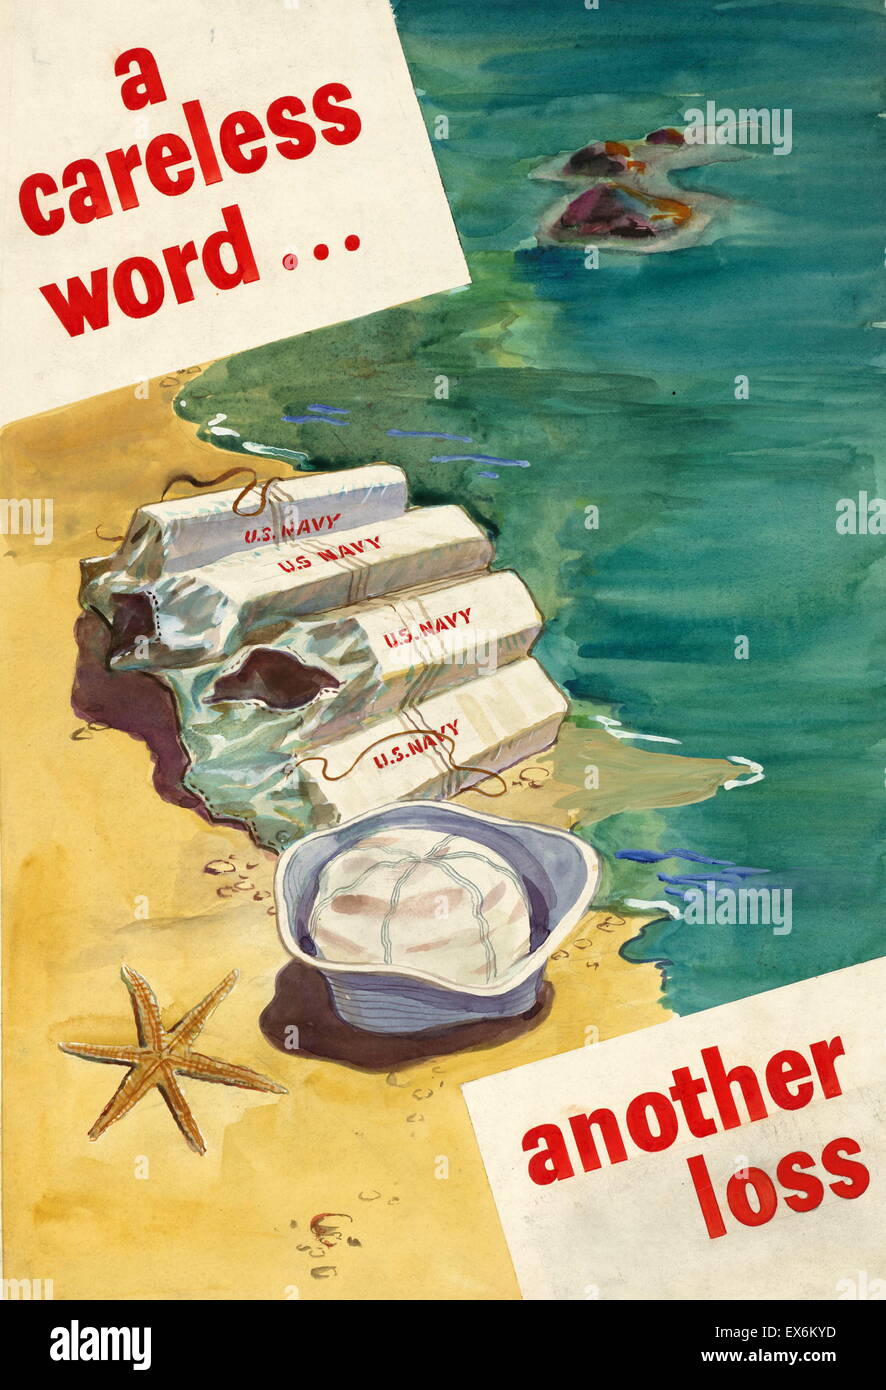 World War Two American propaganda poster ' a careless word… another loss. US Navy 1942 Stock Photo